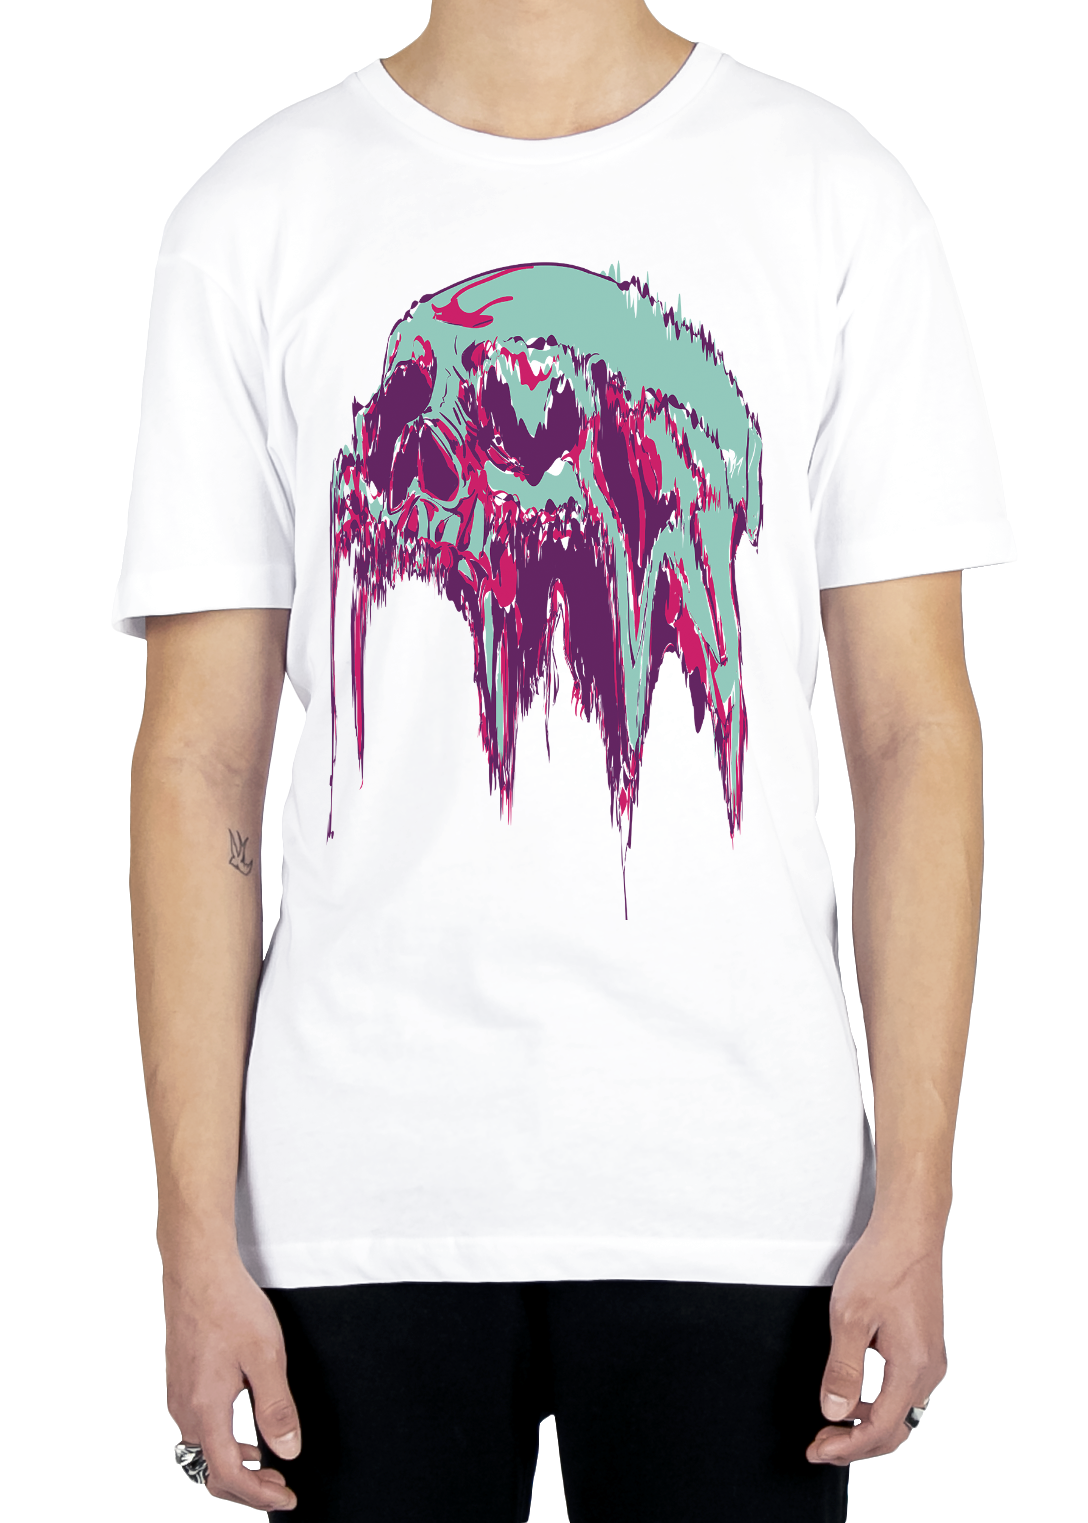 States Of Decay Tee Graphic Tee Vapor95